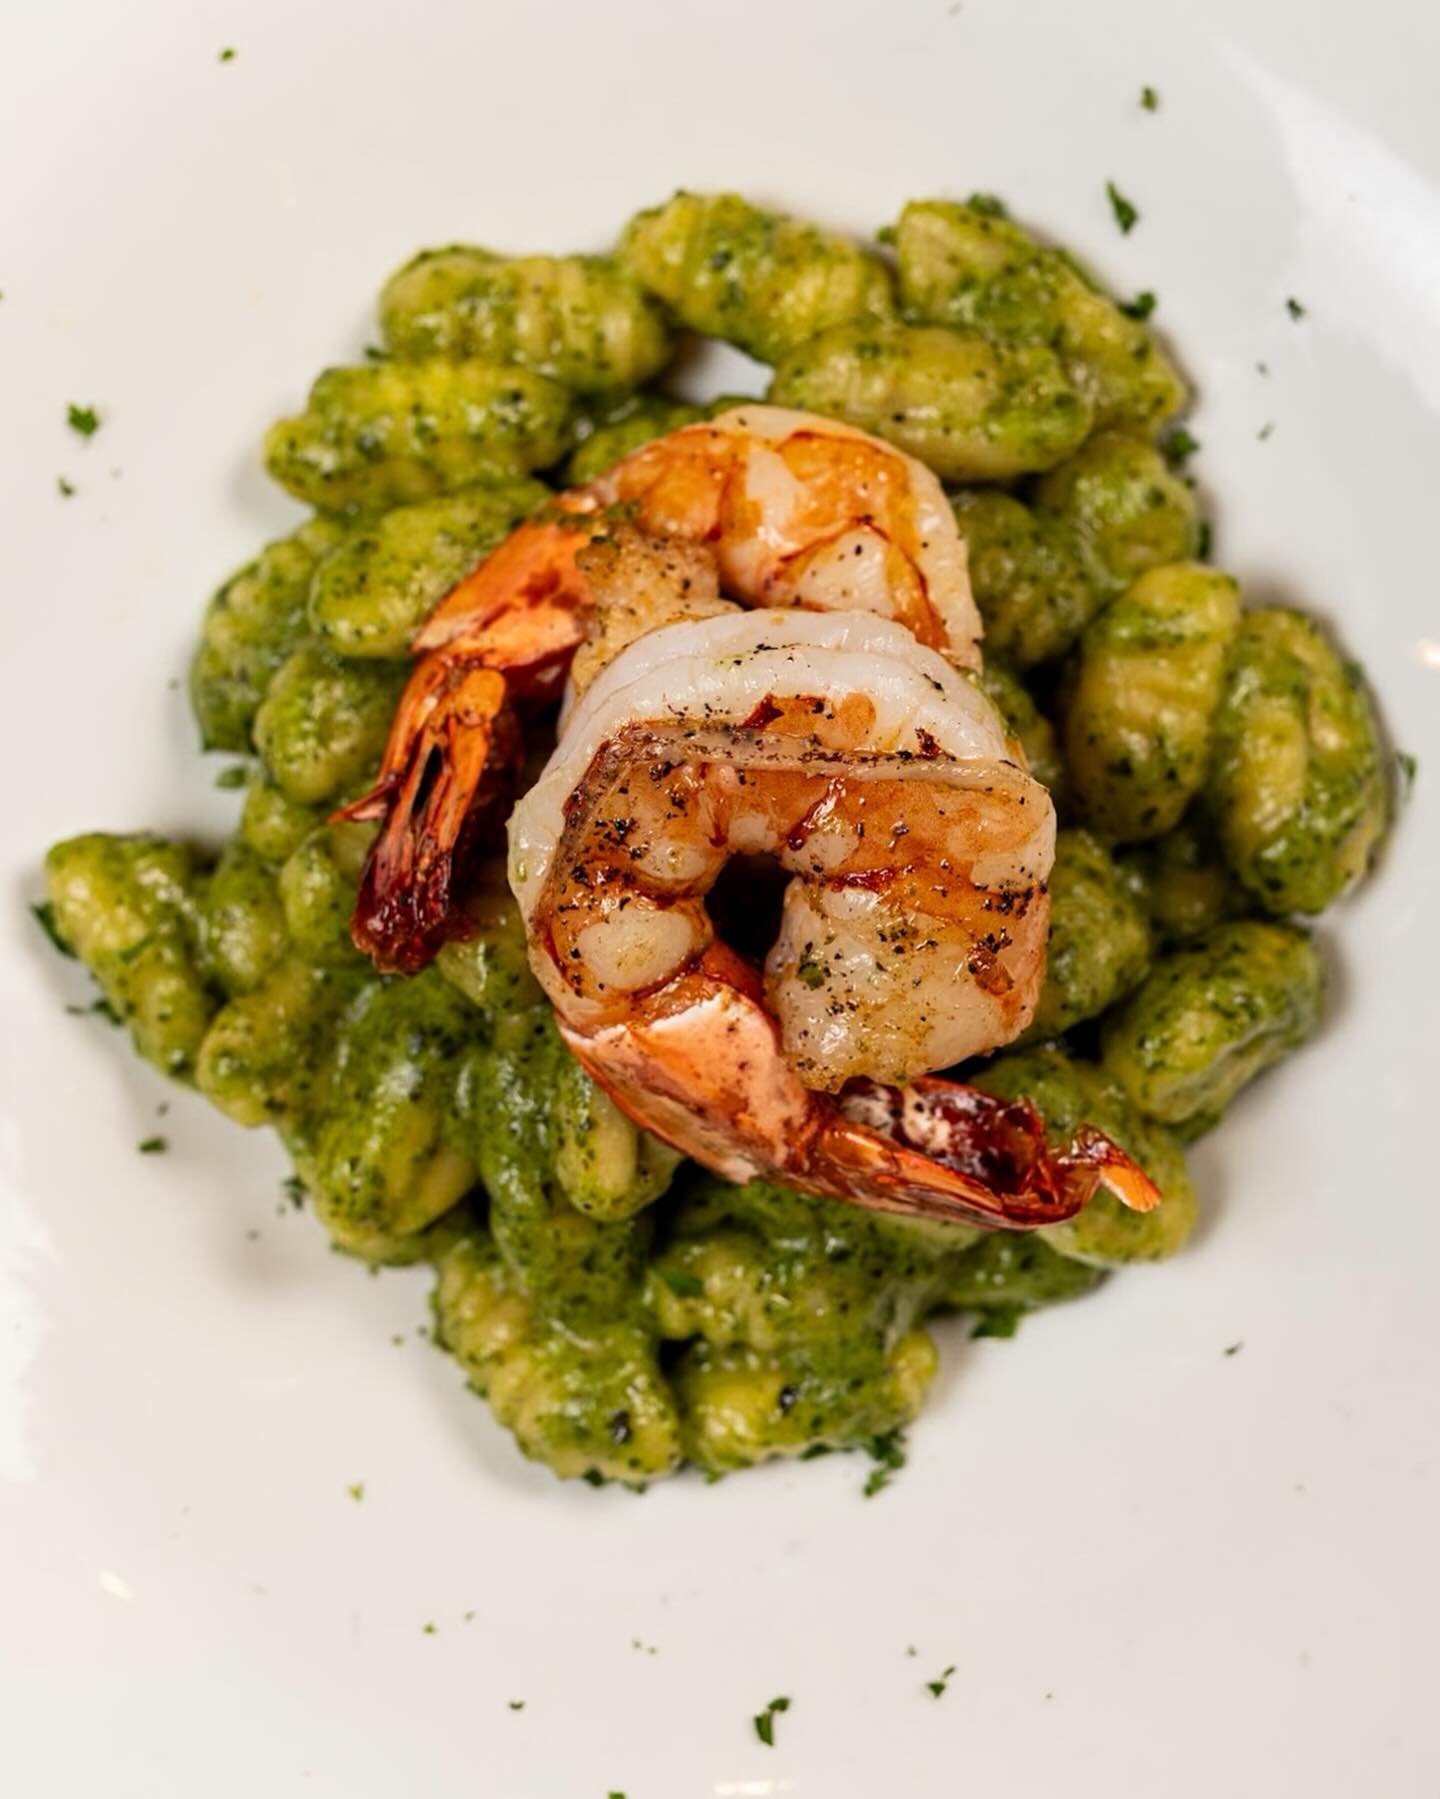 This is a dish that brings us right to our coastal hometown of Palermo. Gnocchi Verdi with pesto genovese, prawns, basil, and lots of rich extra virgin olive oil. When are you going to come try it, amor? 🦐🌿